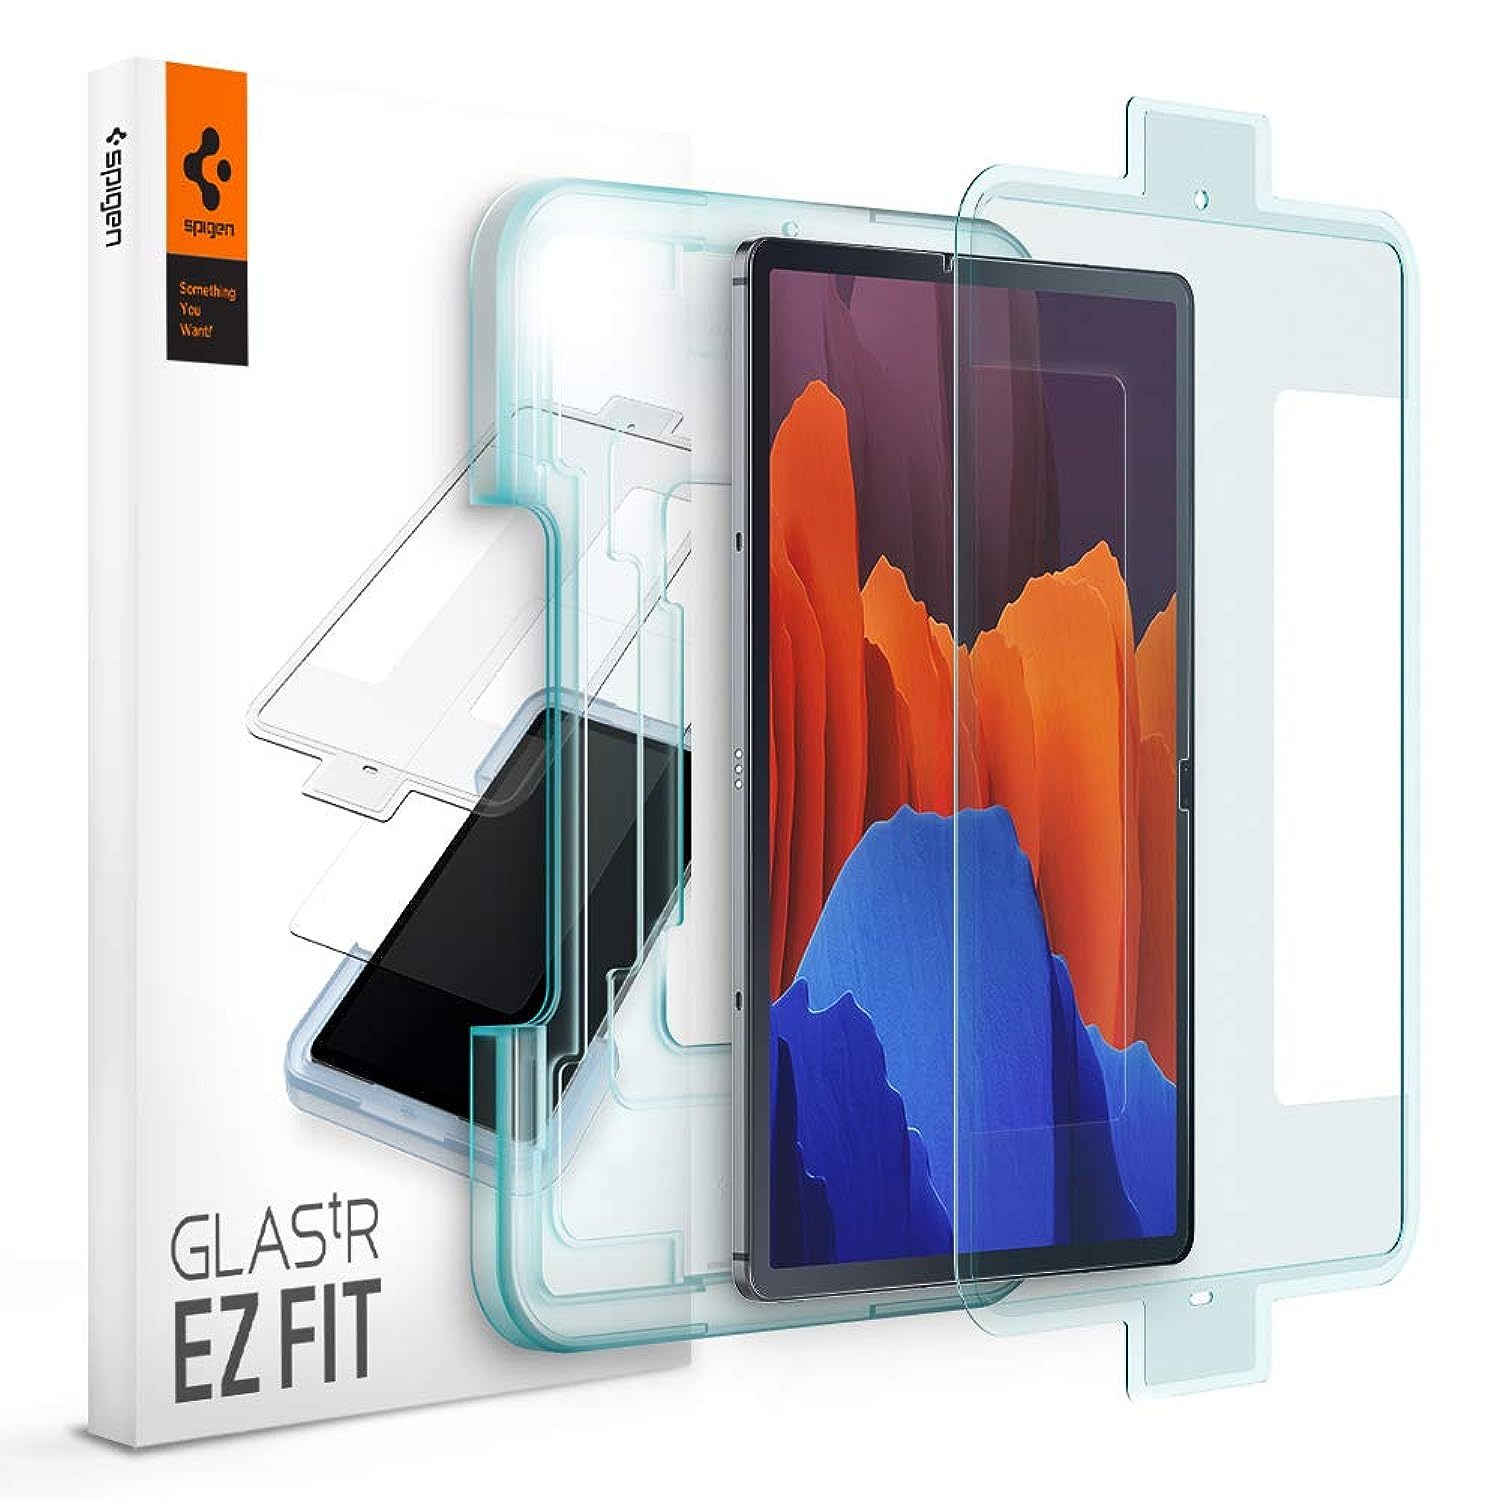 Primary image for Spigen Tempered Glass Screen Protector [GlasTR EZ FIT] Designed for Galaxy Tab S